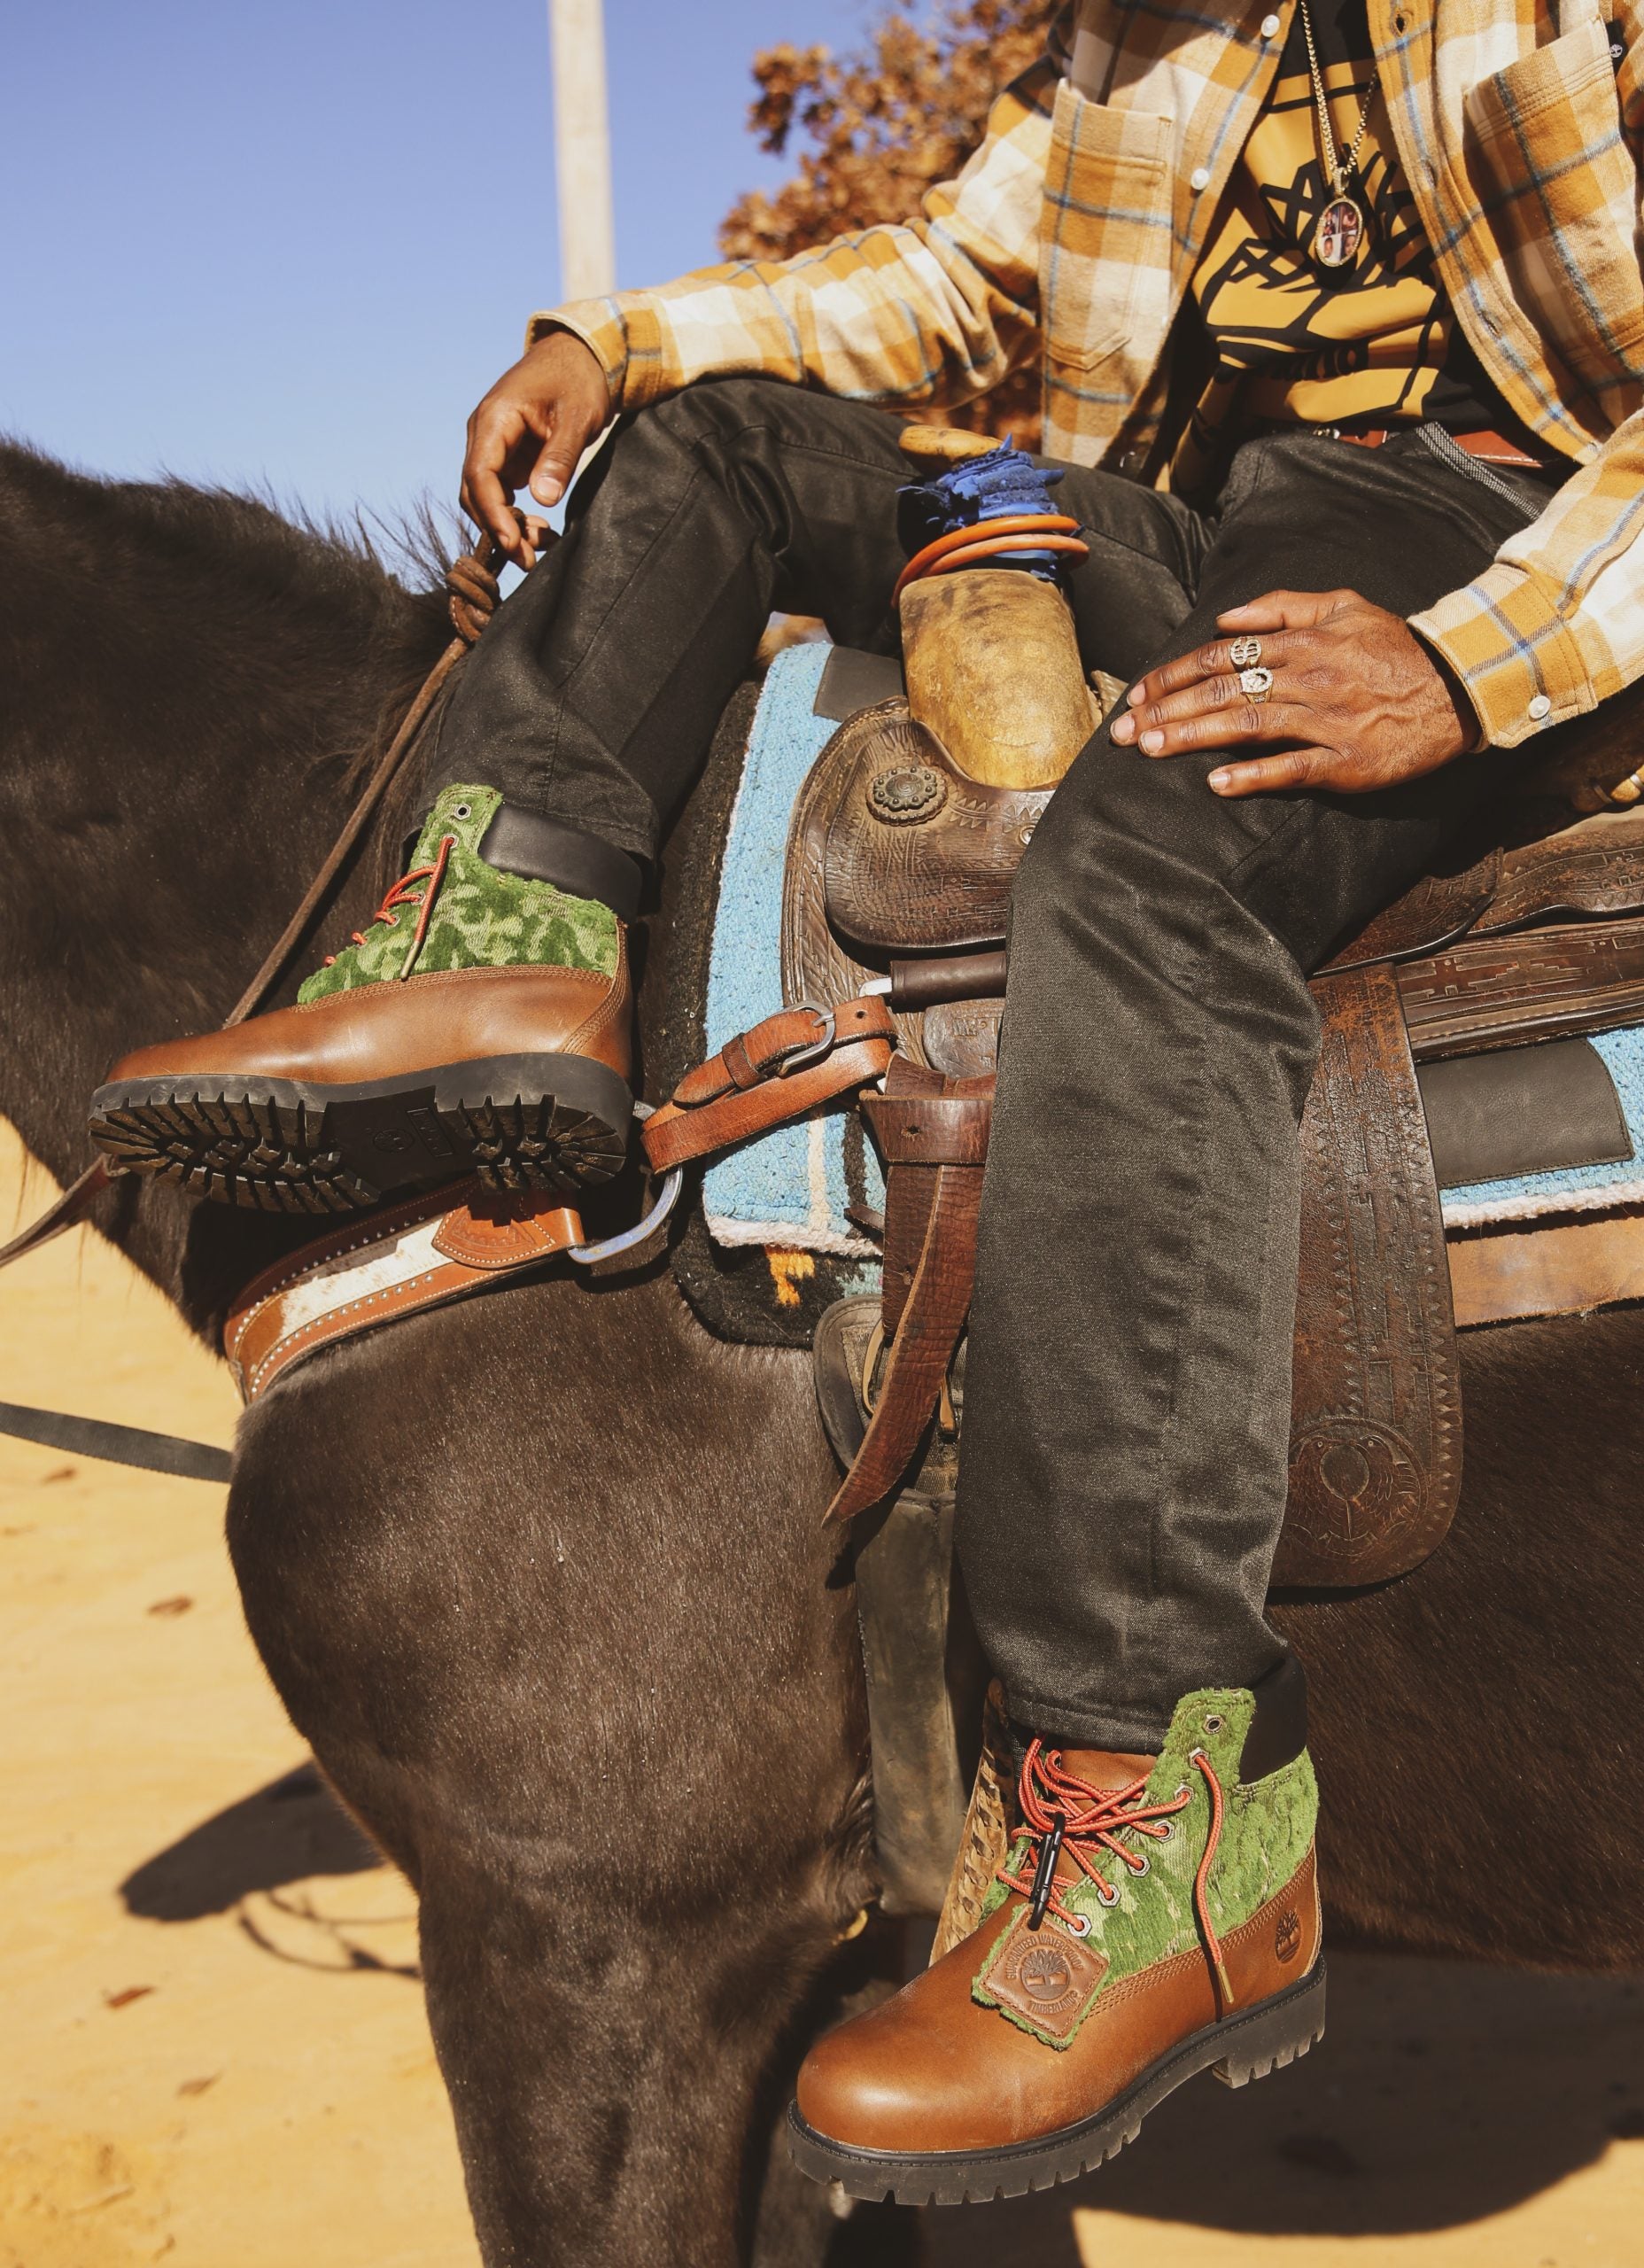 Timberland Celebrates The Oklahoma Cowboys In Its Latest Campaign